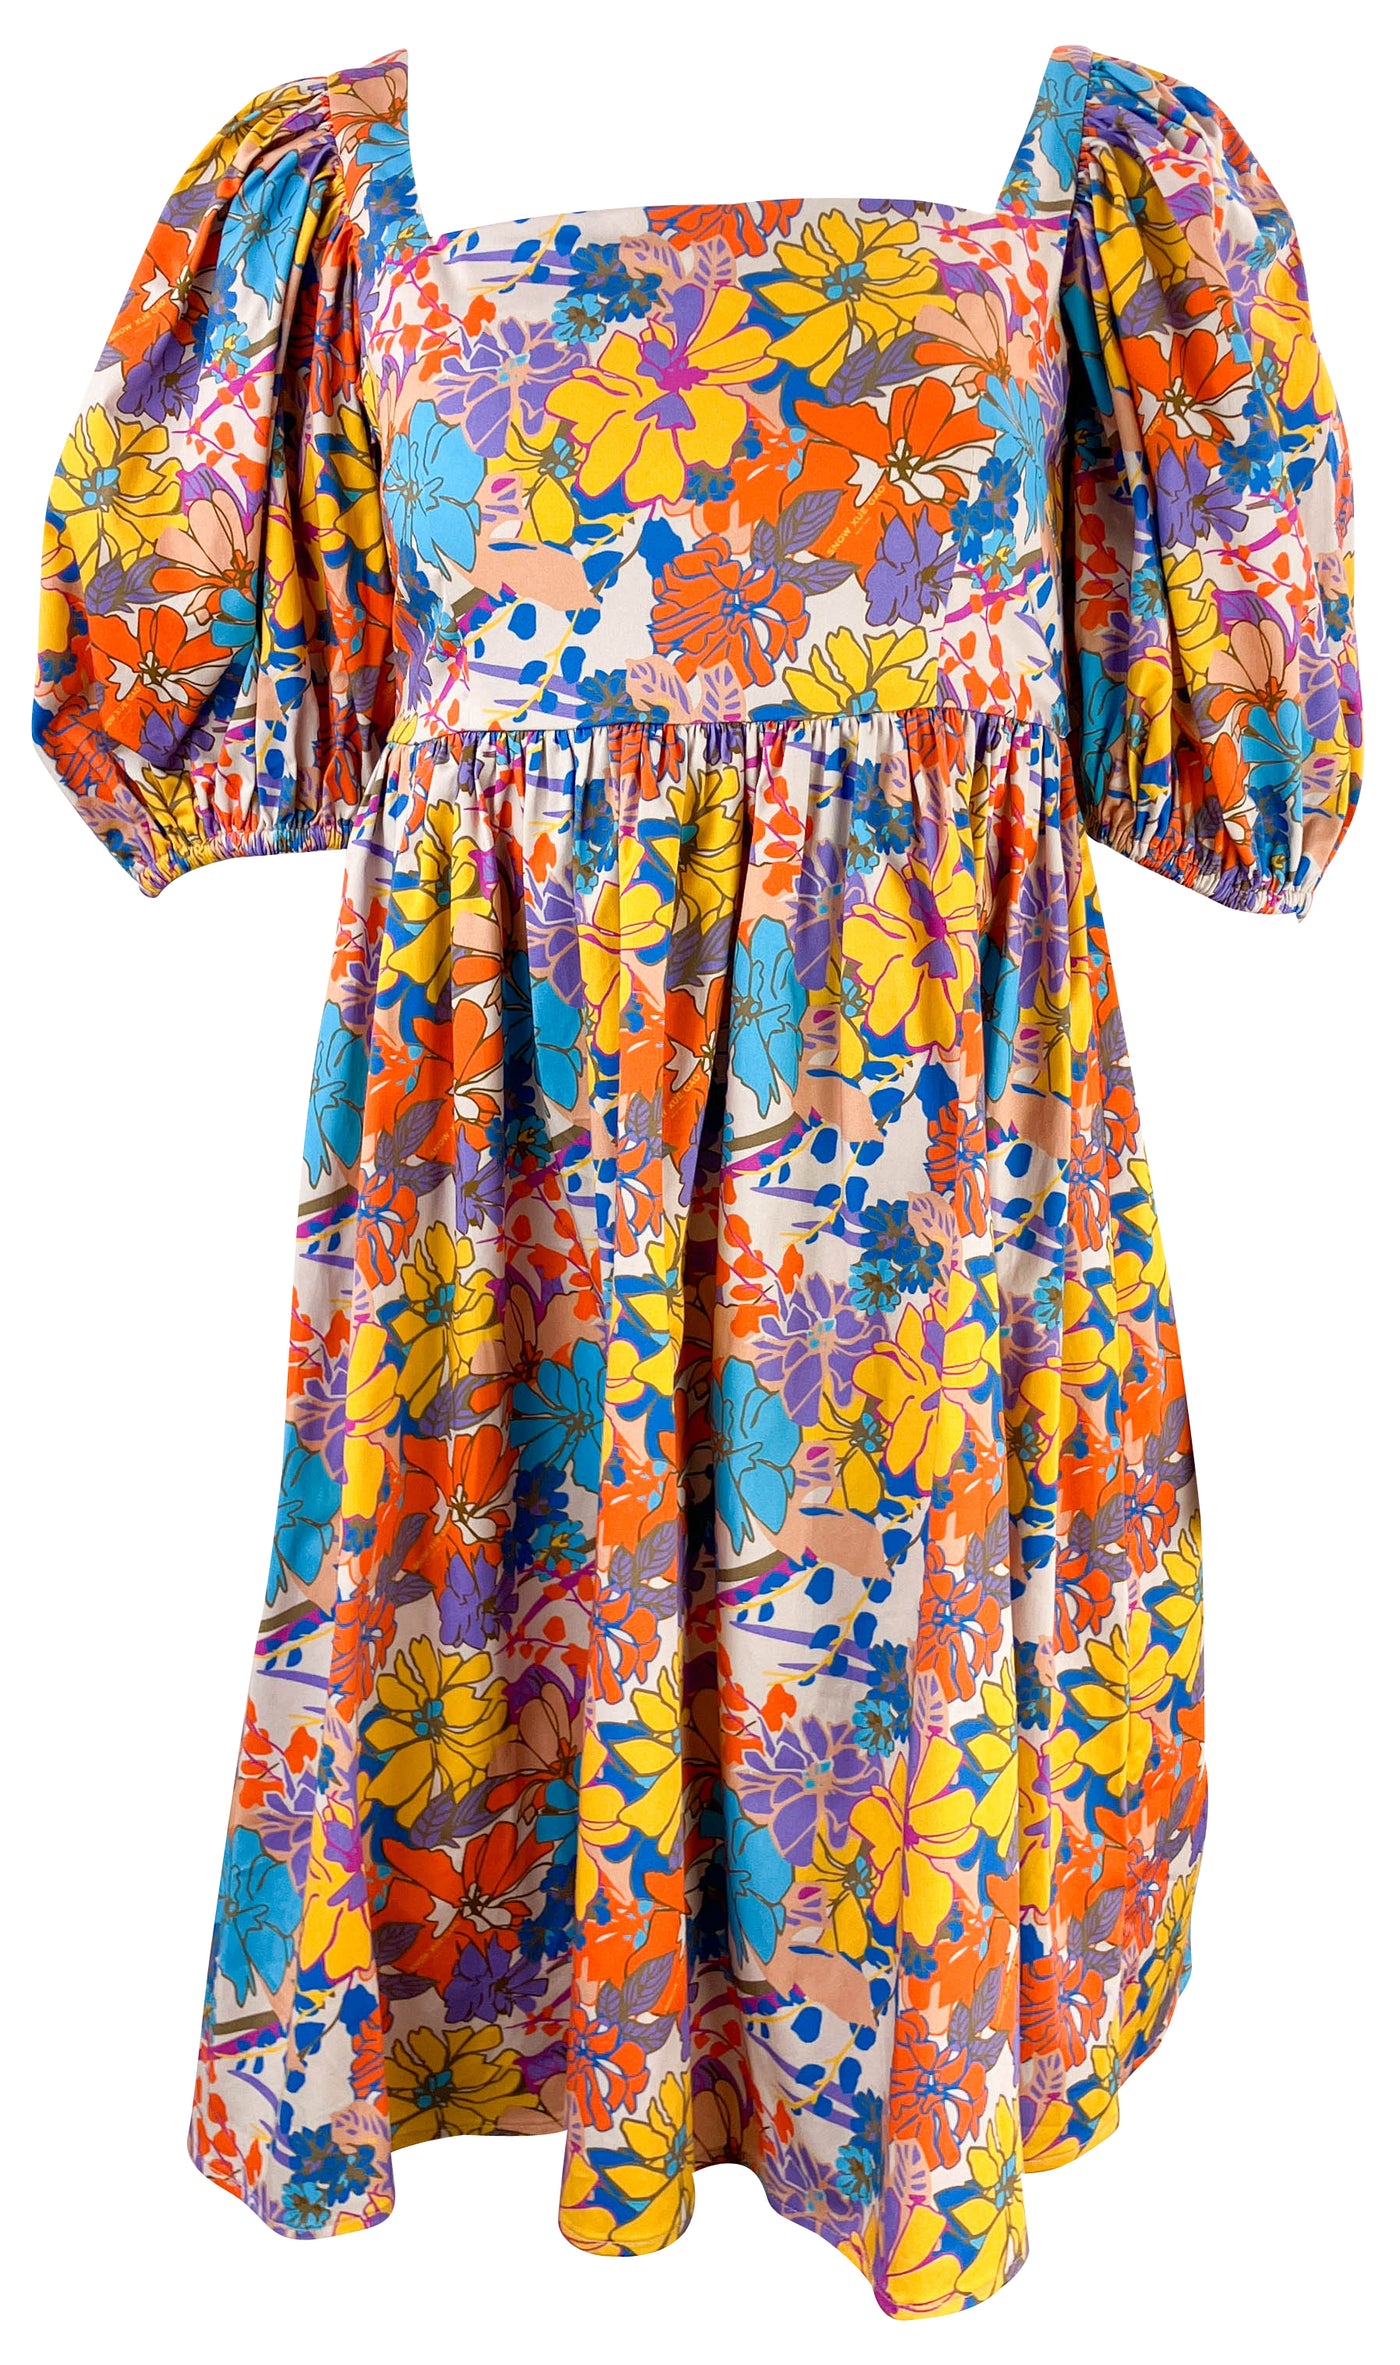 Snow Xue Gao Floral Print Babydoll Dress in Orange - Discounts on Snow Xue Gao at UAL